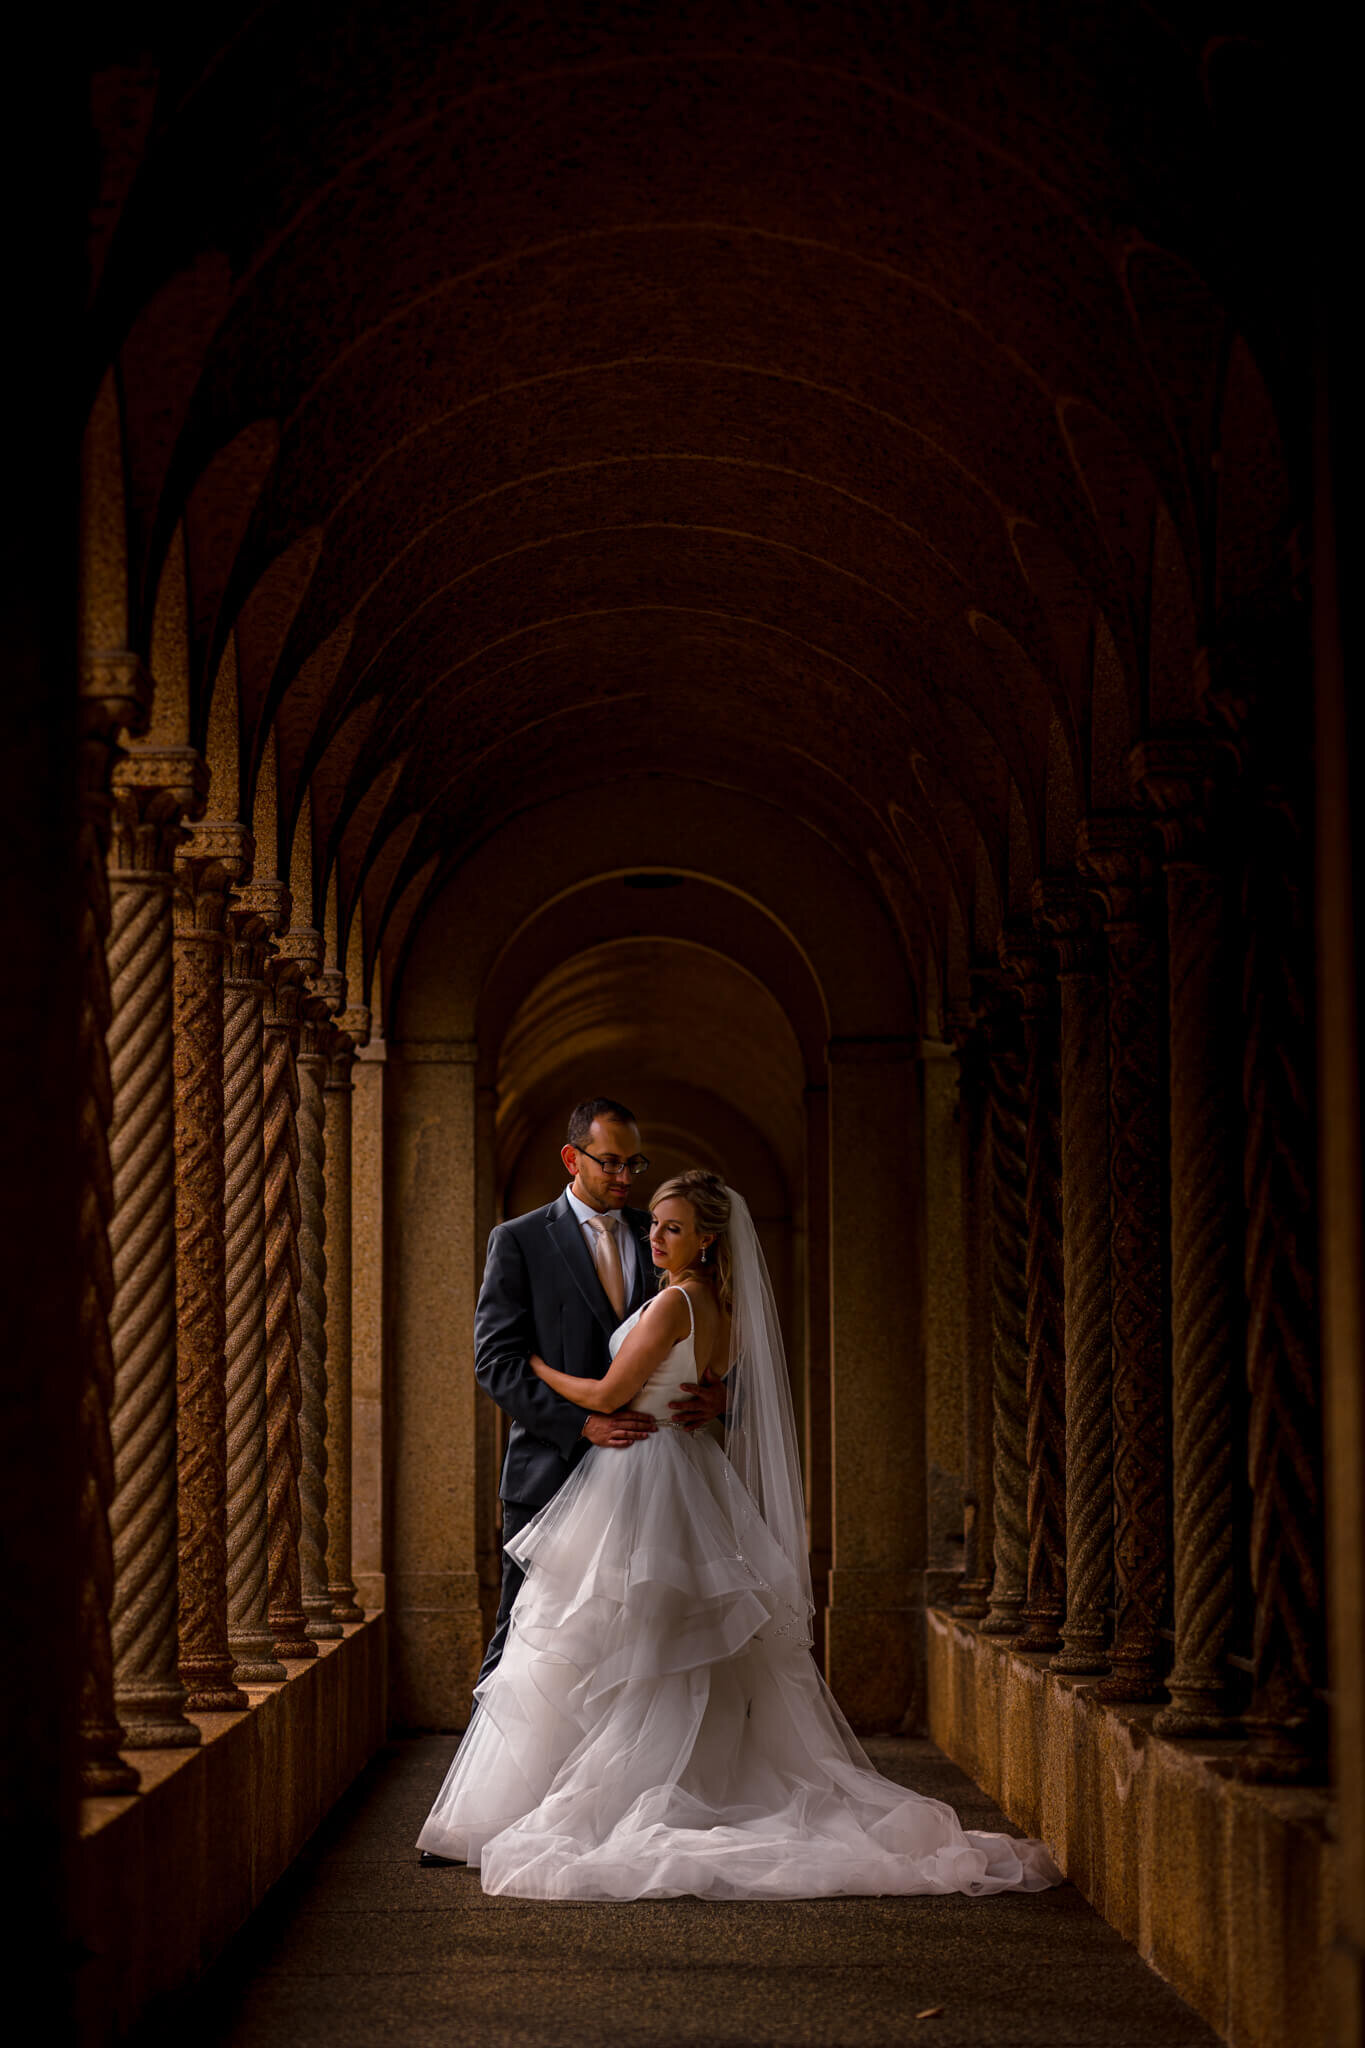 01-Washington-DC-Mini-Wedding-St-Francis-Hall-Franciscan-Monastery-First-Look-Photography-by-Bee-Two-Sweet-150.jpg